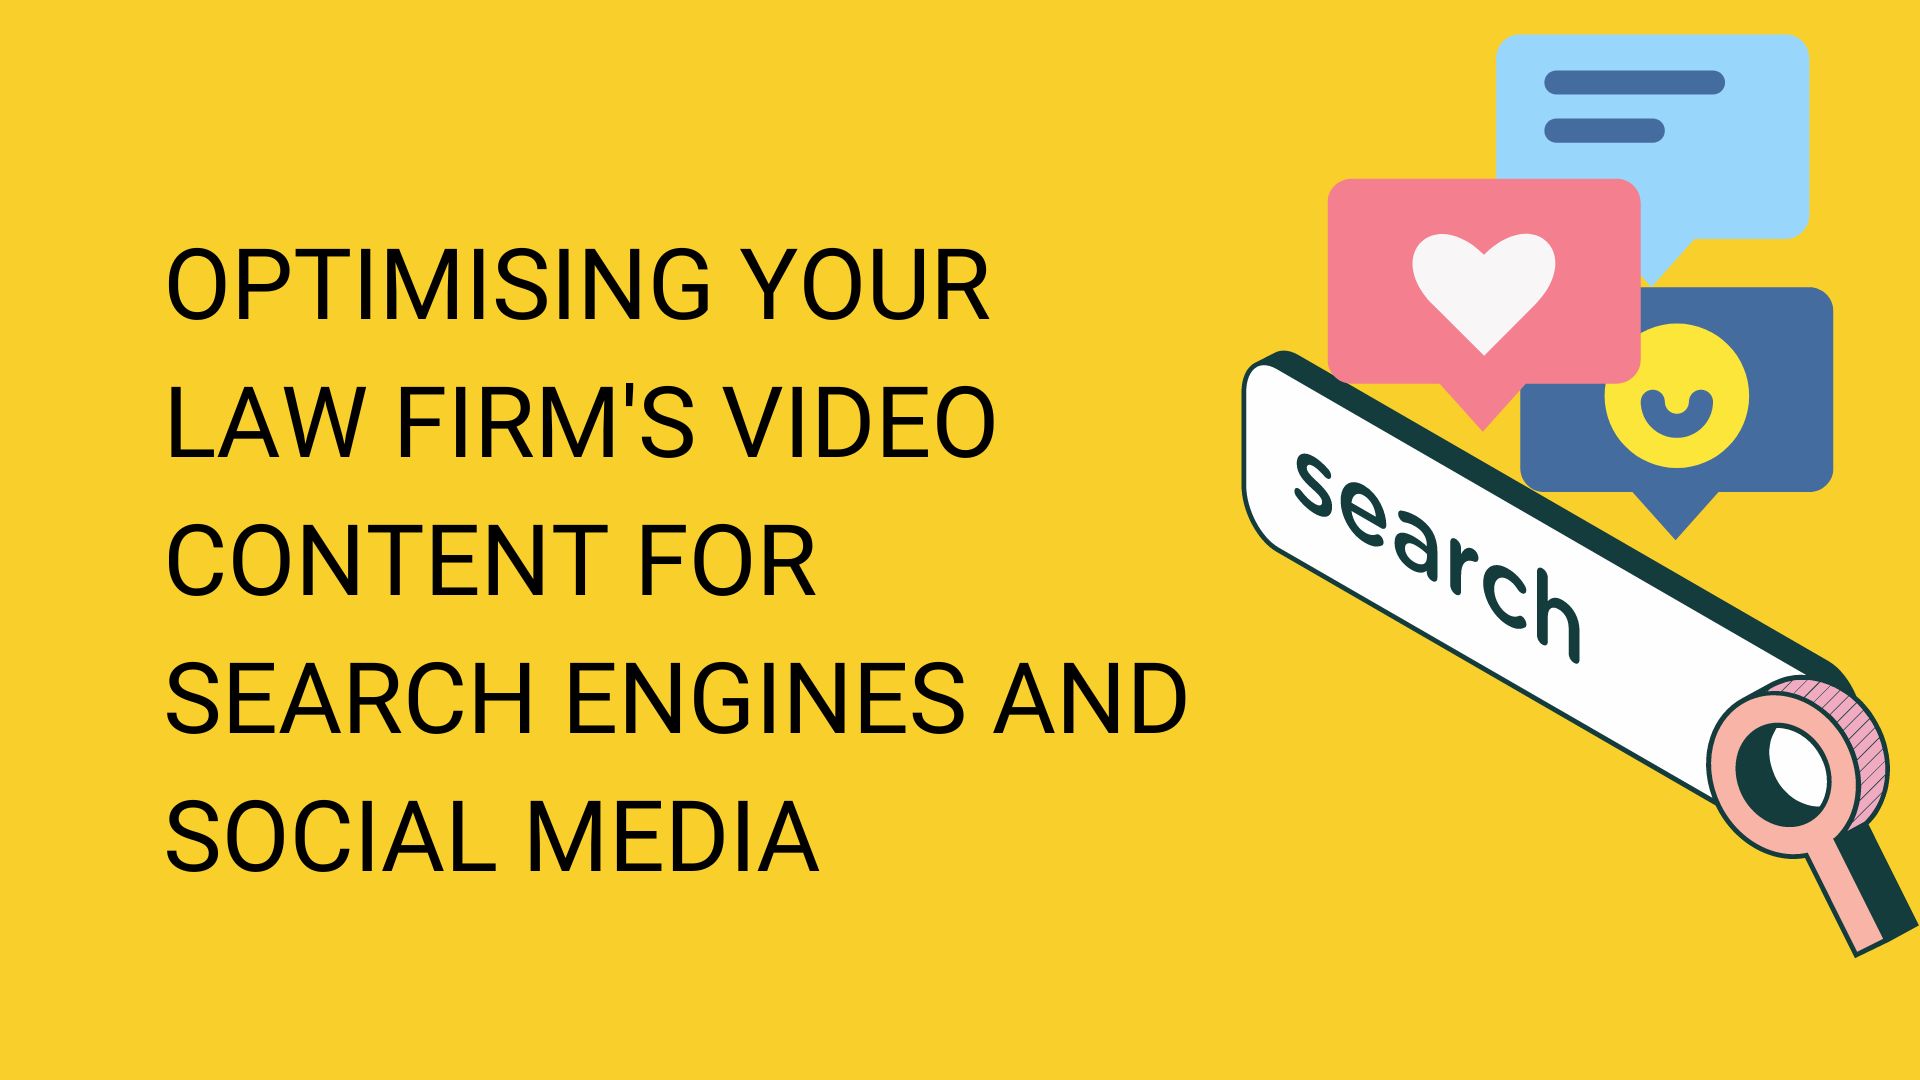 Optimising Your Law Firm’s Video Content for Search Engines and Social Media